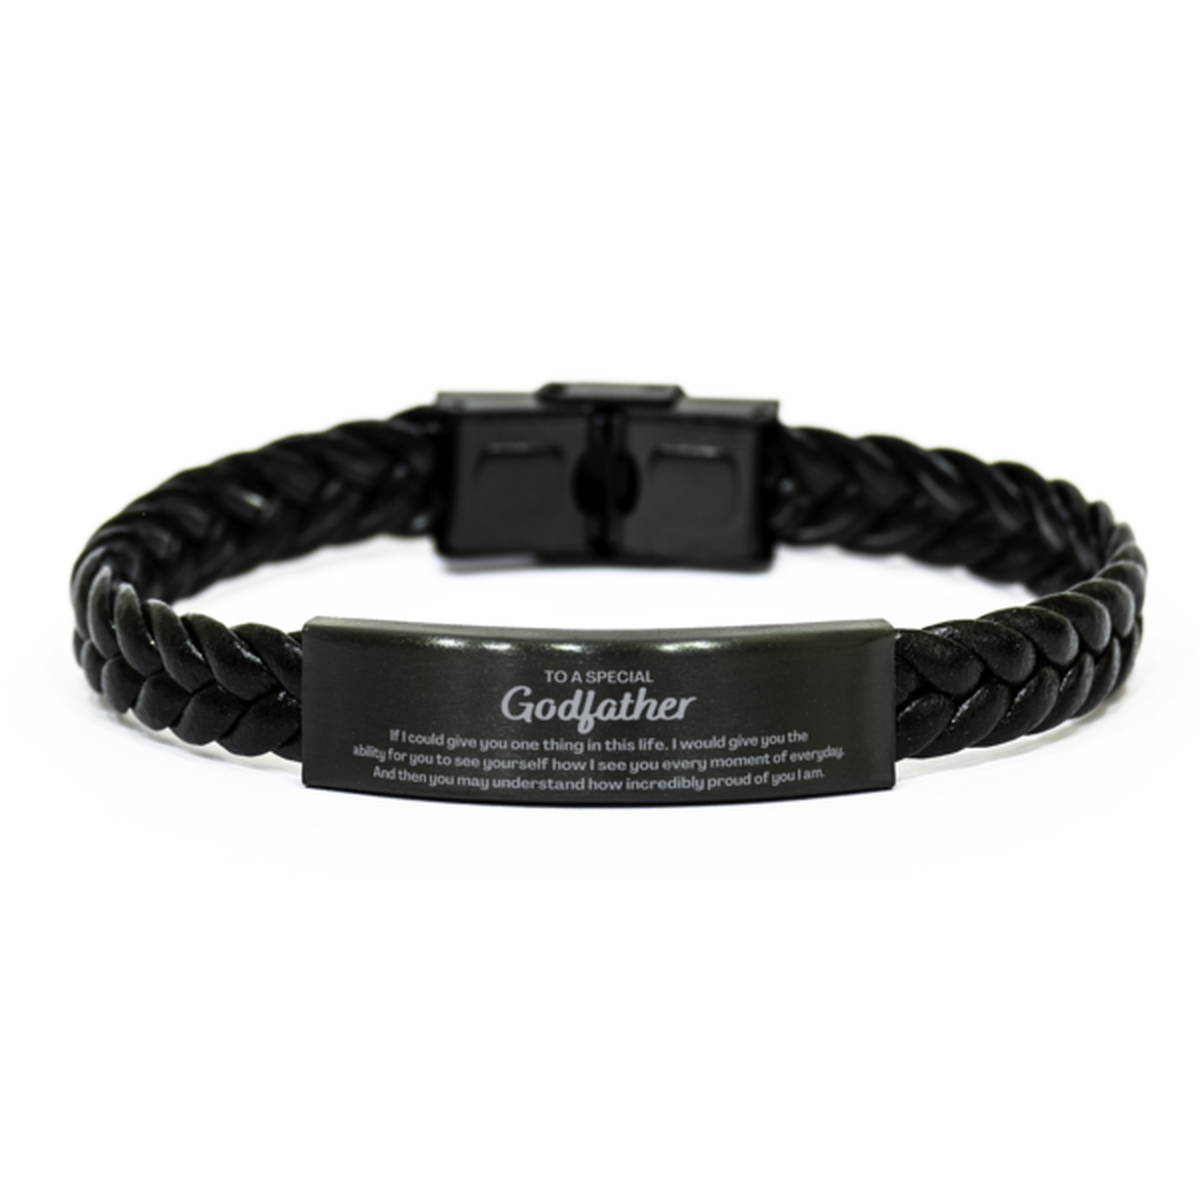 To My Godfather Braided Leather Bracelet, Gifts For Godfather Engraved, Inspirational Gifts for Christmas Birthday, Epic Gifts for Godfather To A Special Godfather how incredibly proud of you I am